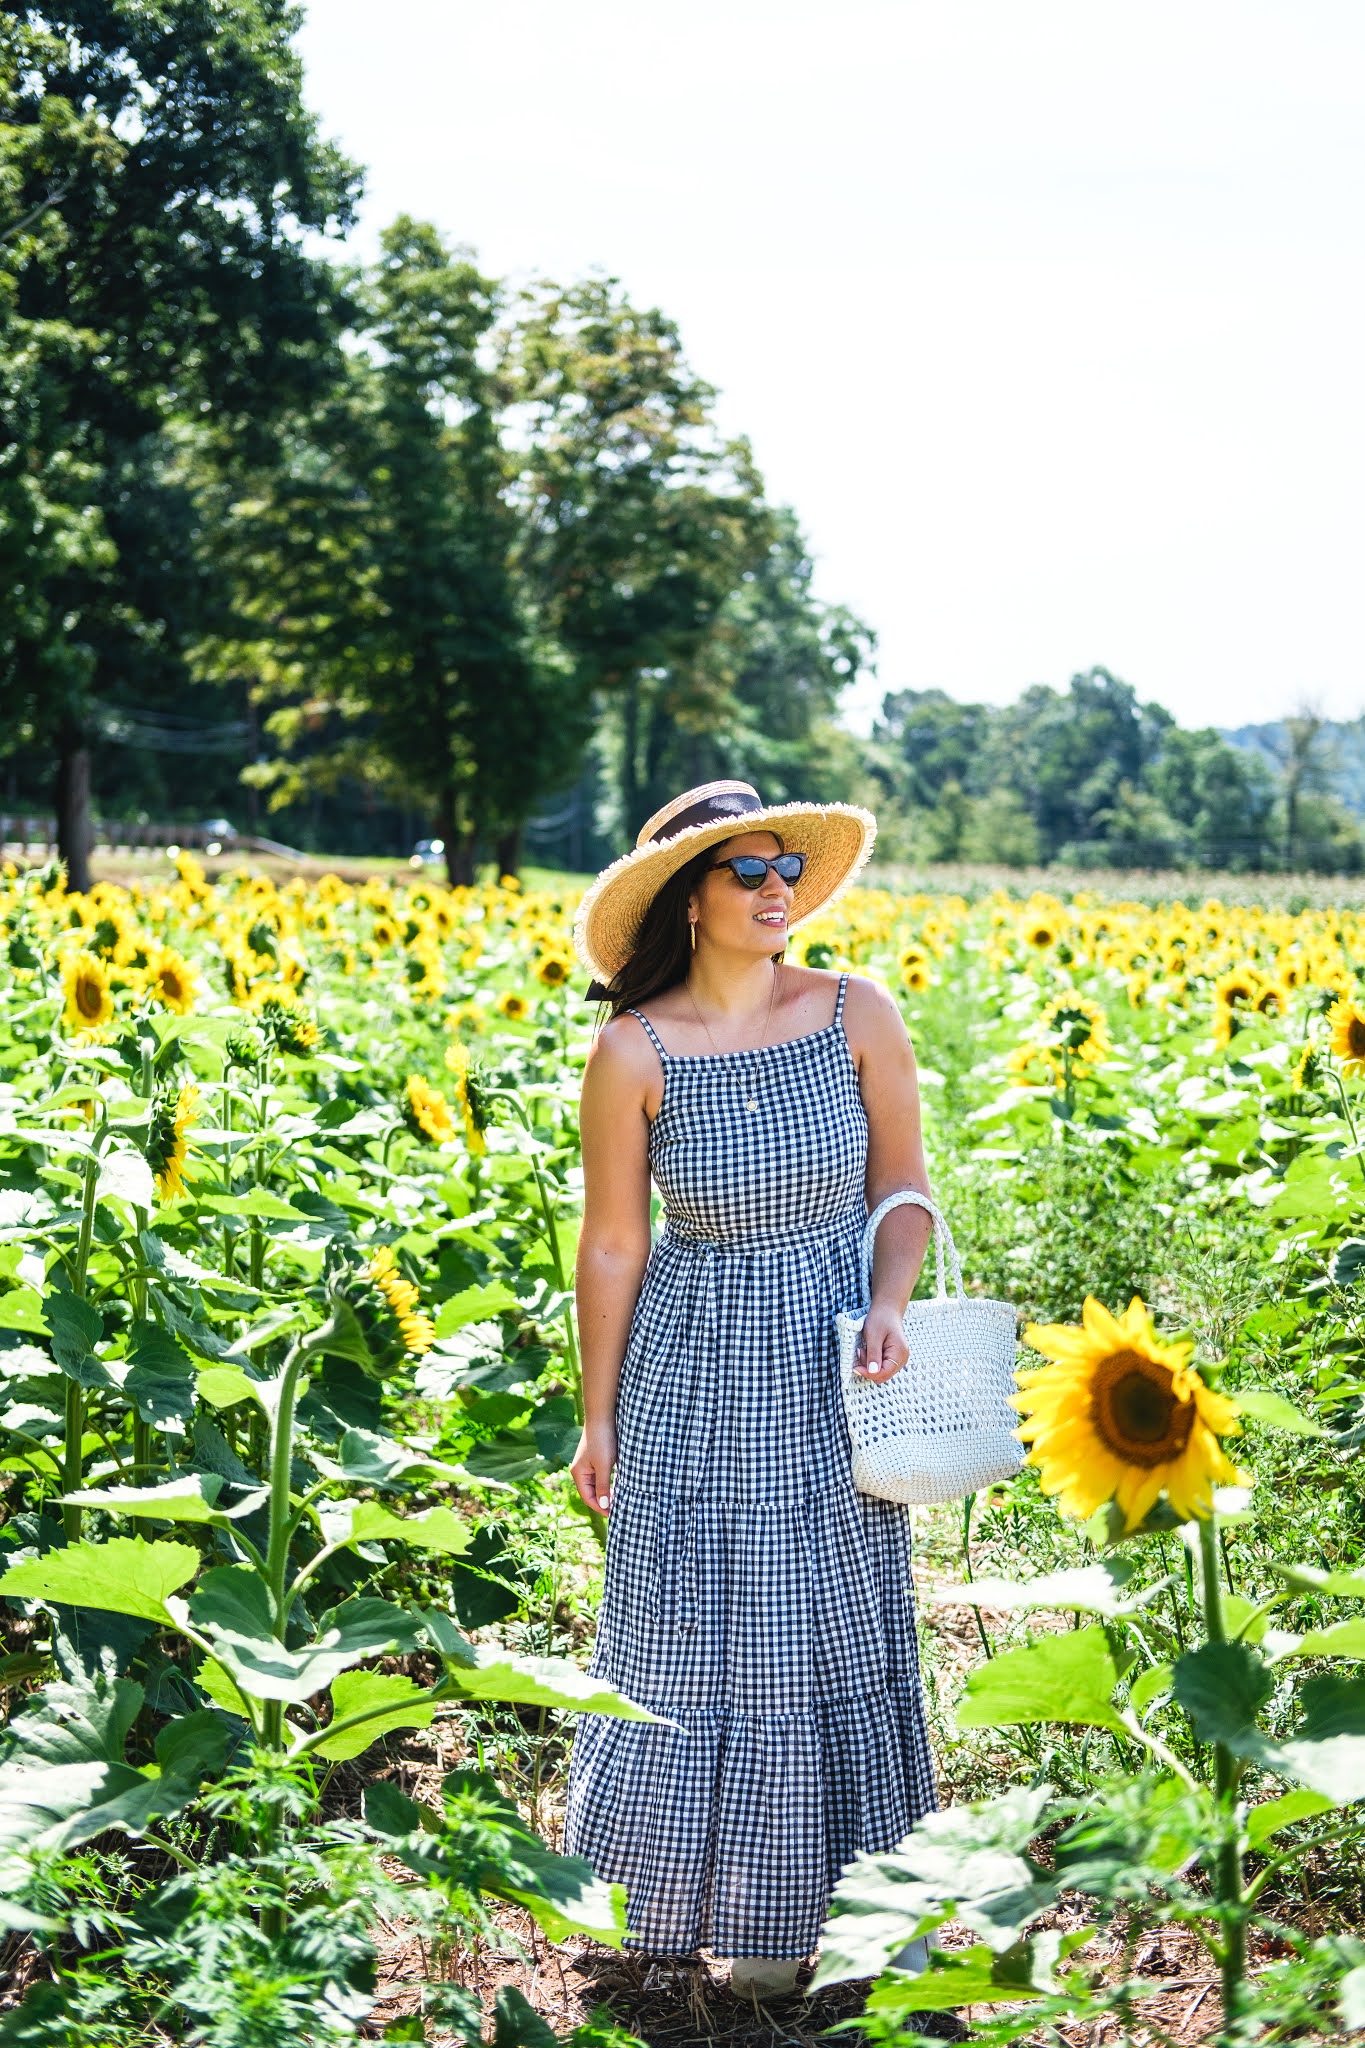 Sea of Sunflowers - Chic on the Cheap